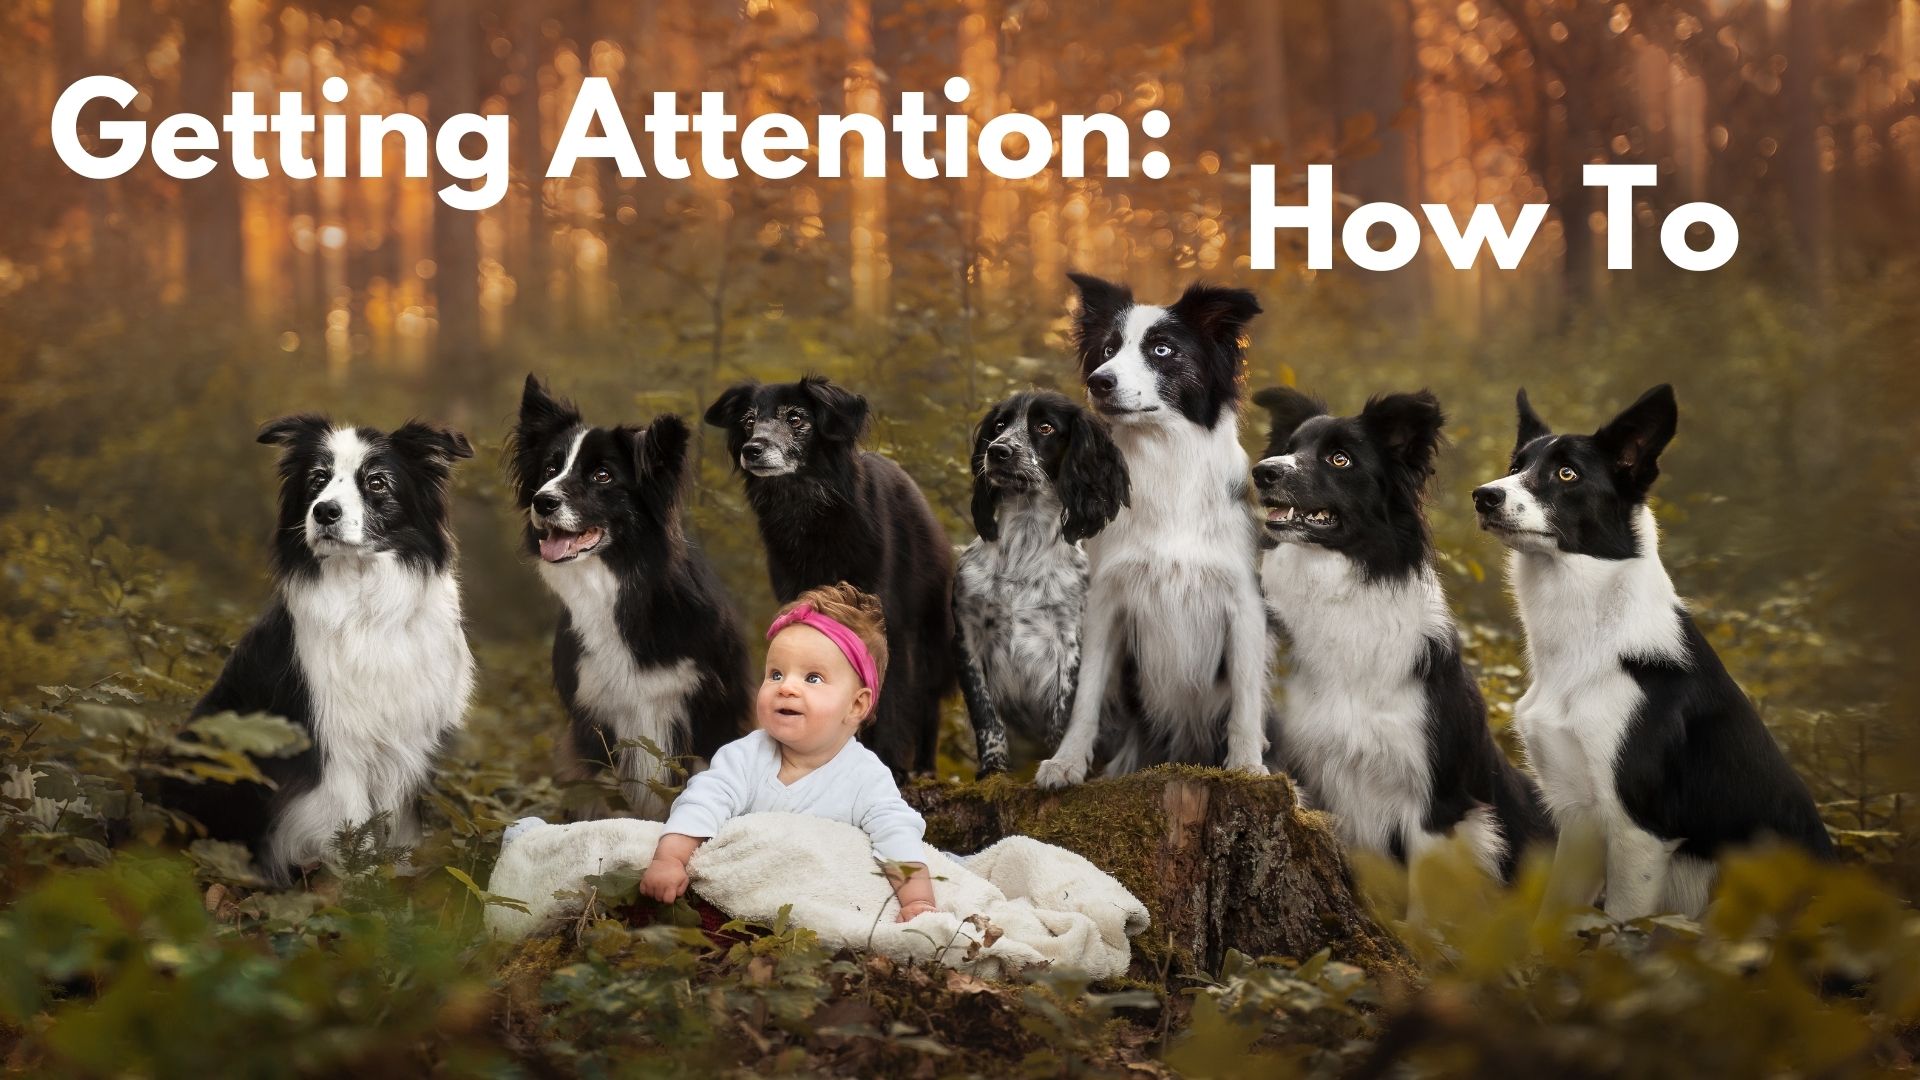 Getting Attention: How To